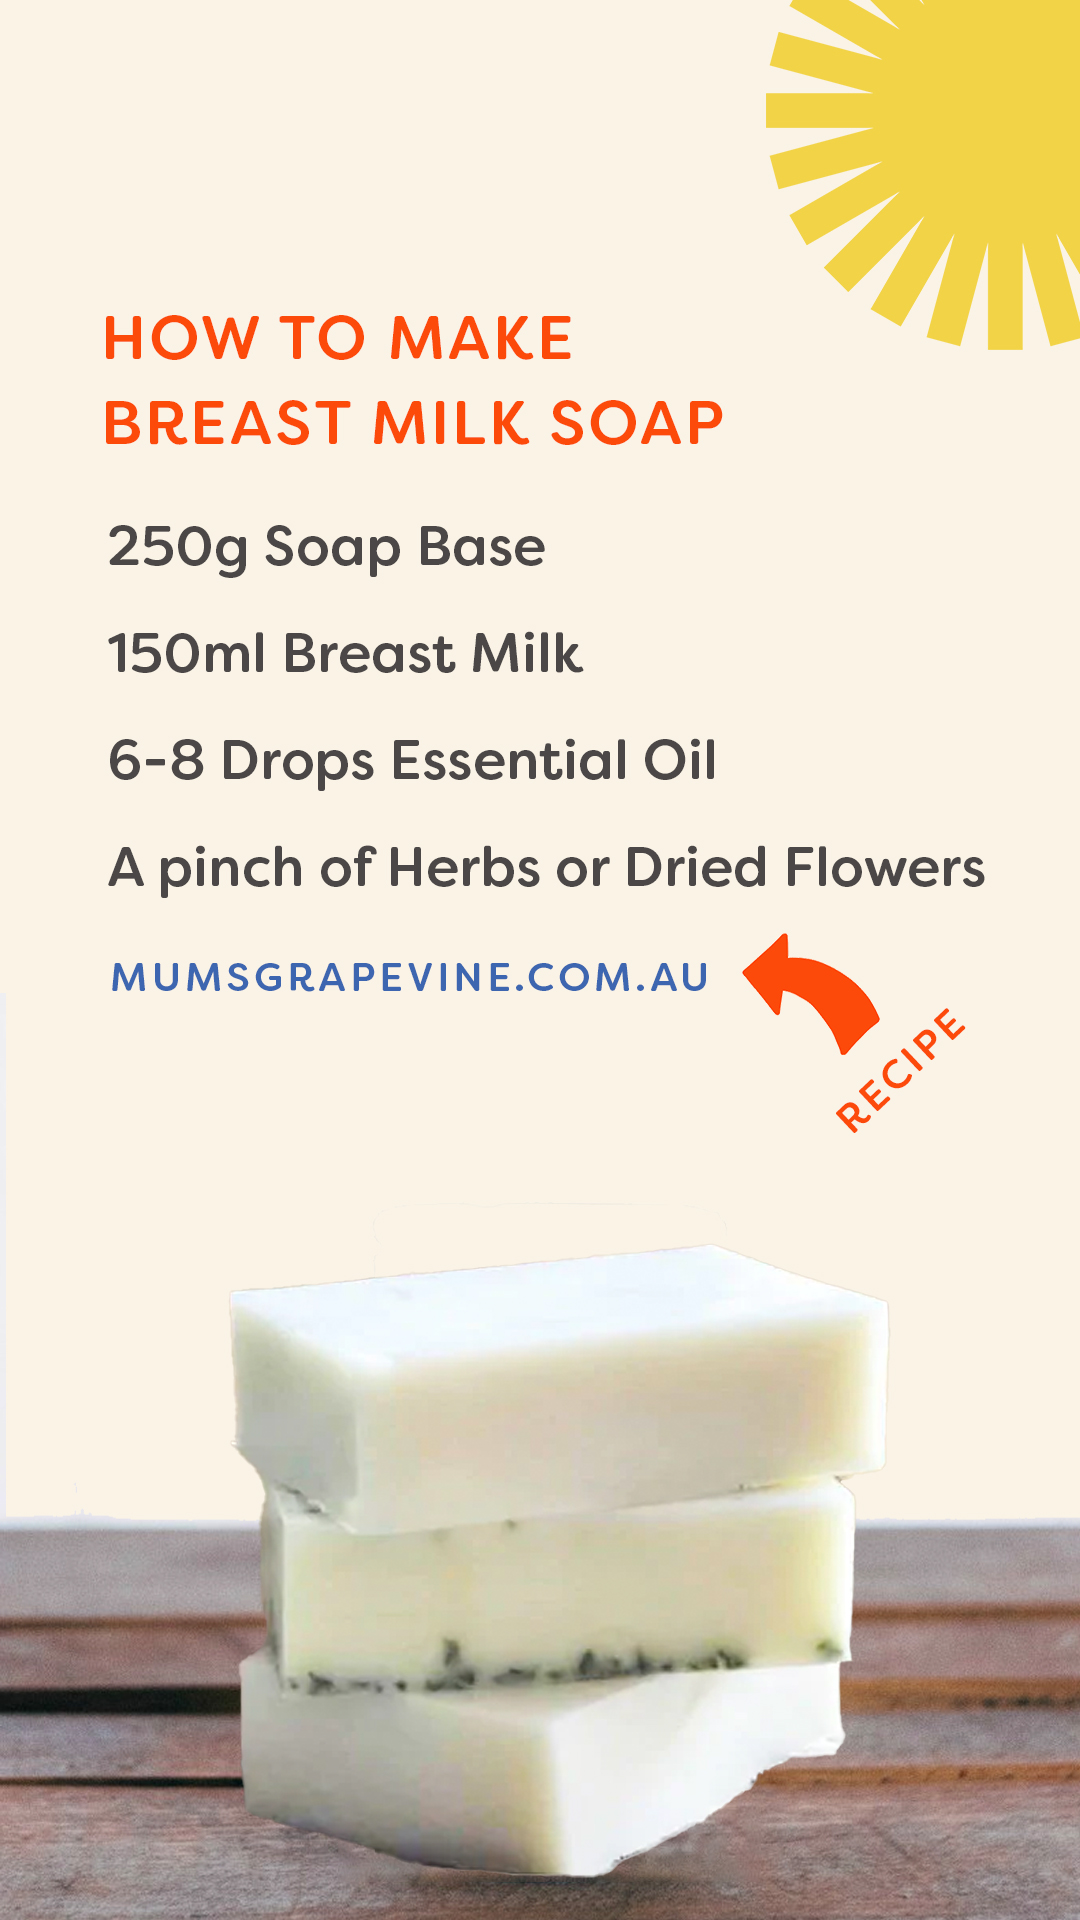 Ingredients listed to make homemade breast milk soap